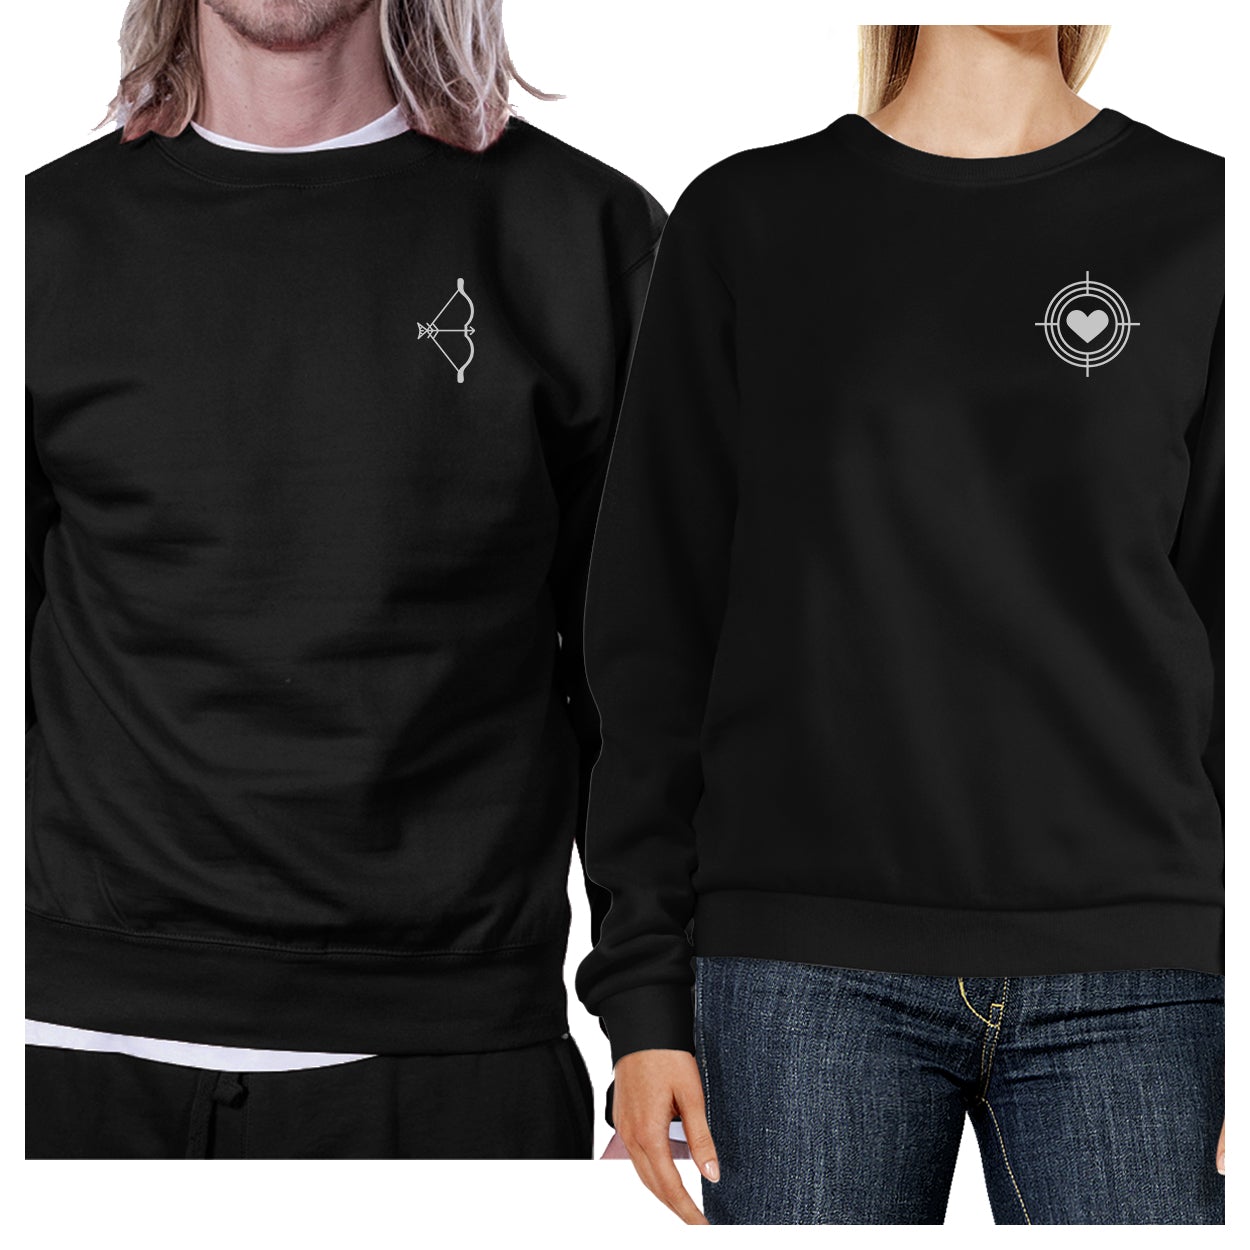 Bow And Arrow To Heart Target Matching Couple Black Sweatshirts